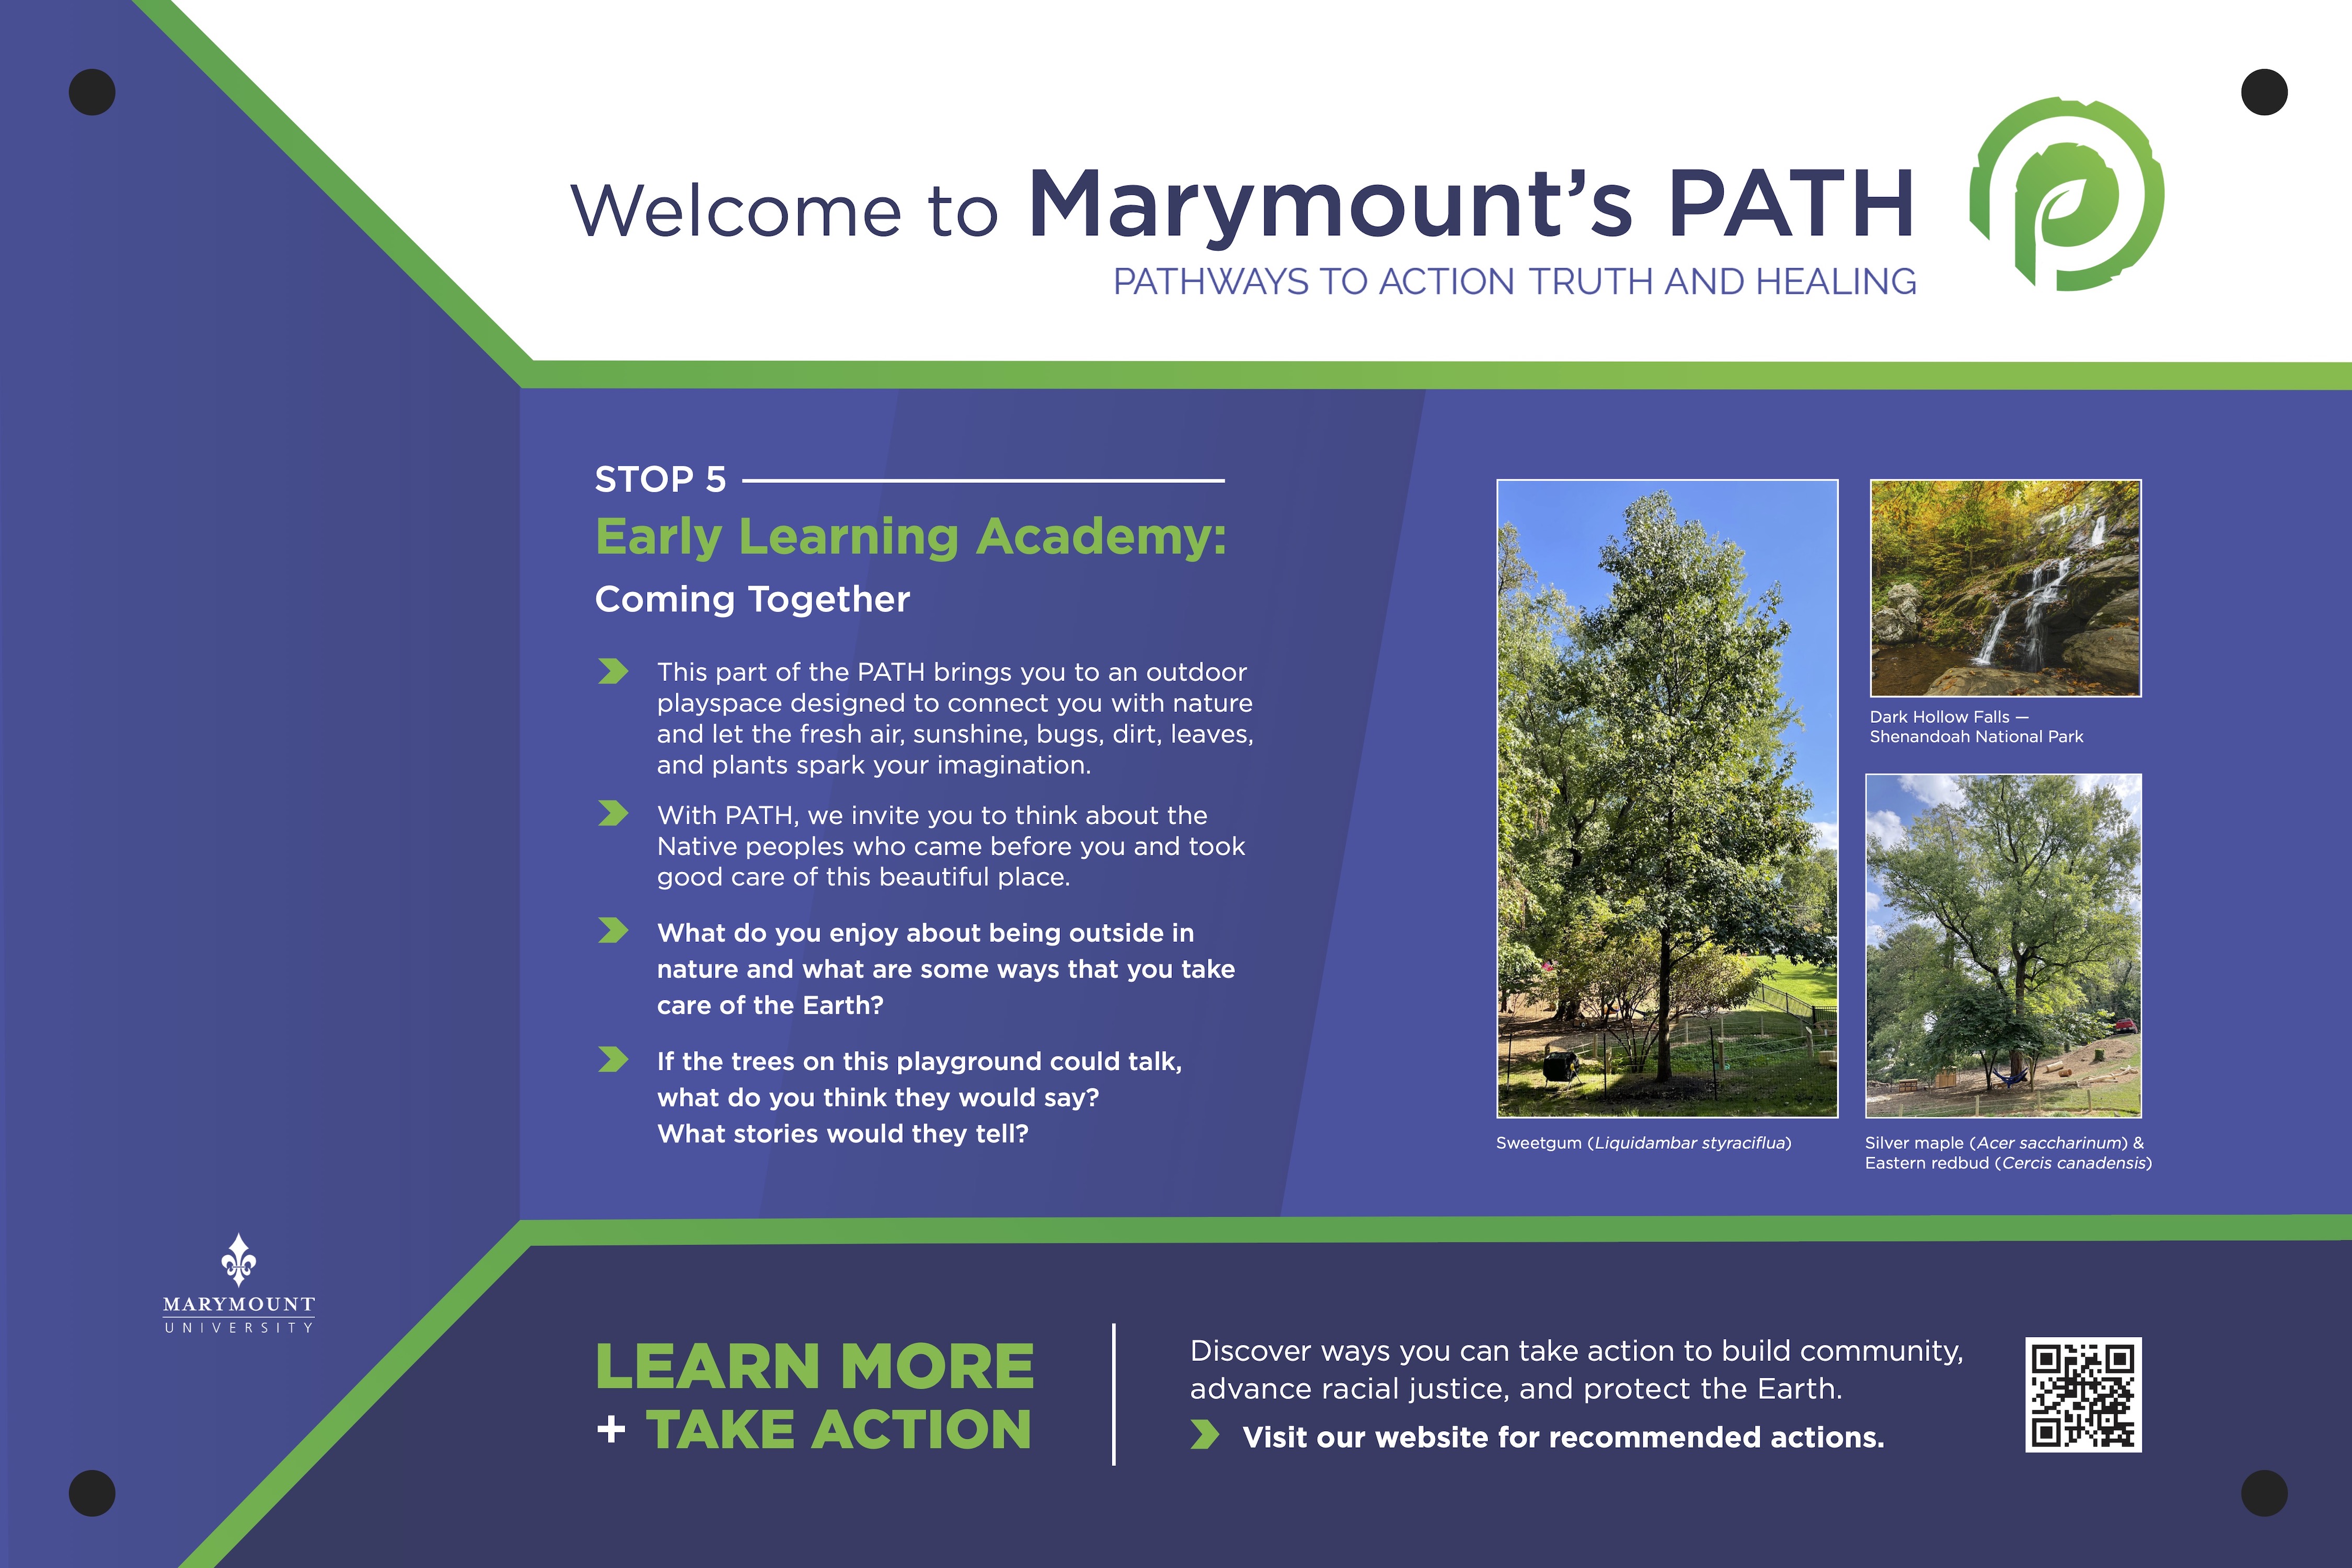 5. Early Learning Academy